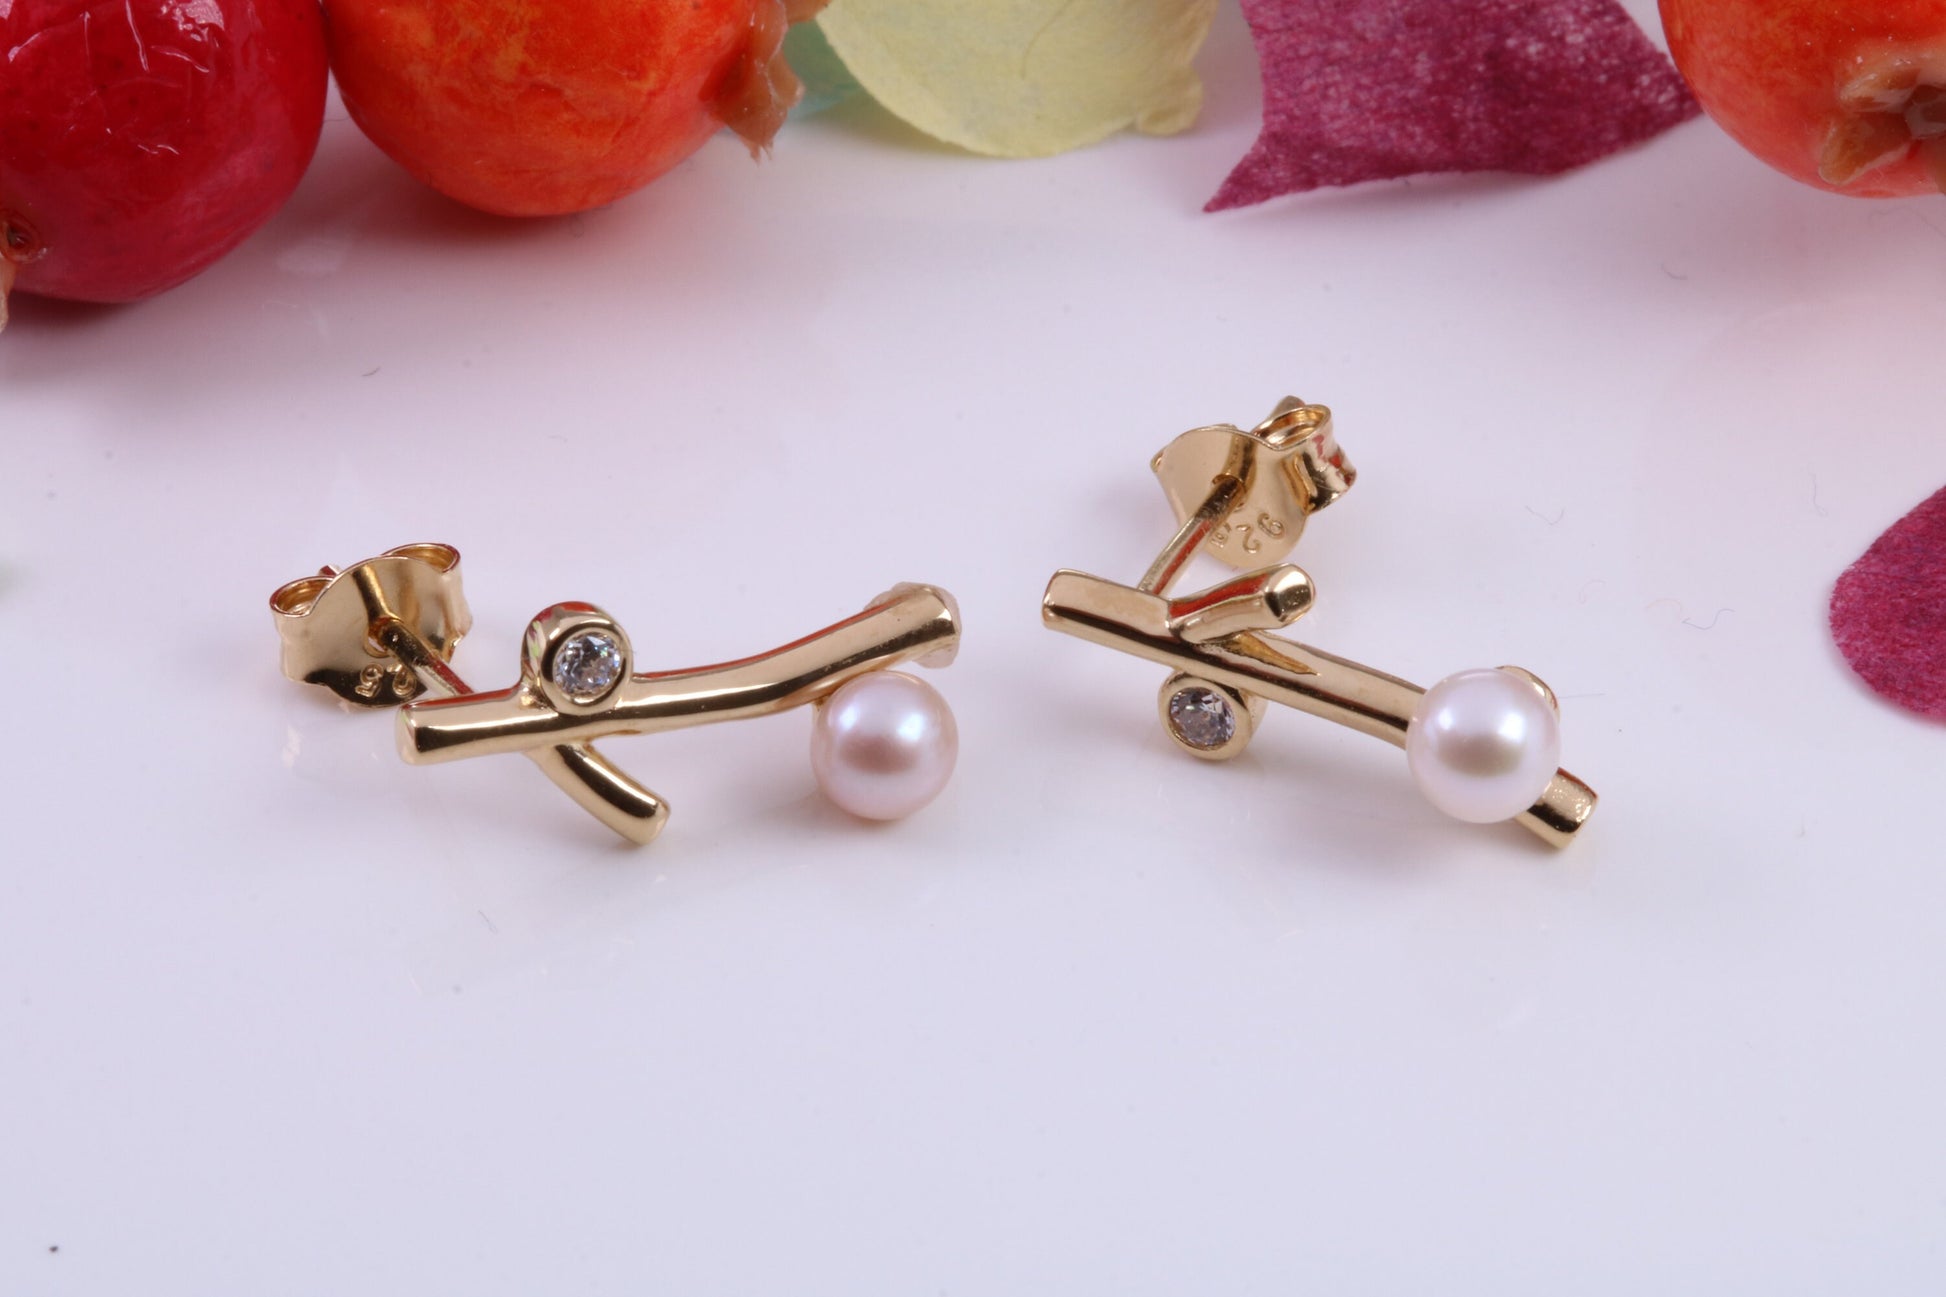 16 mm Long Pearl and Cubic Zirconia set Earrings, Made from Solid 925 Grade Sterling Silver and 18ct Yellow Gold Plated